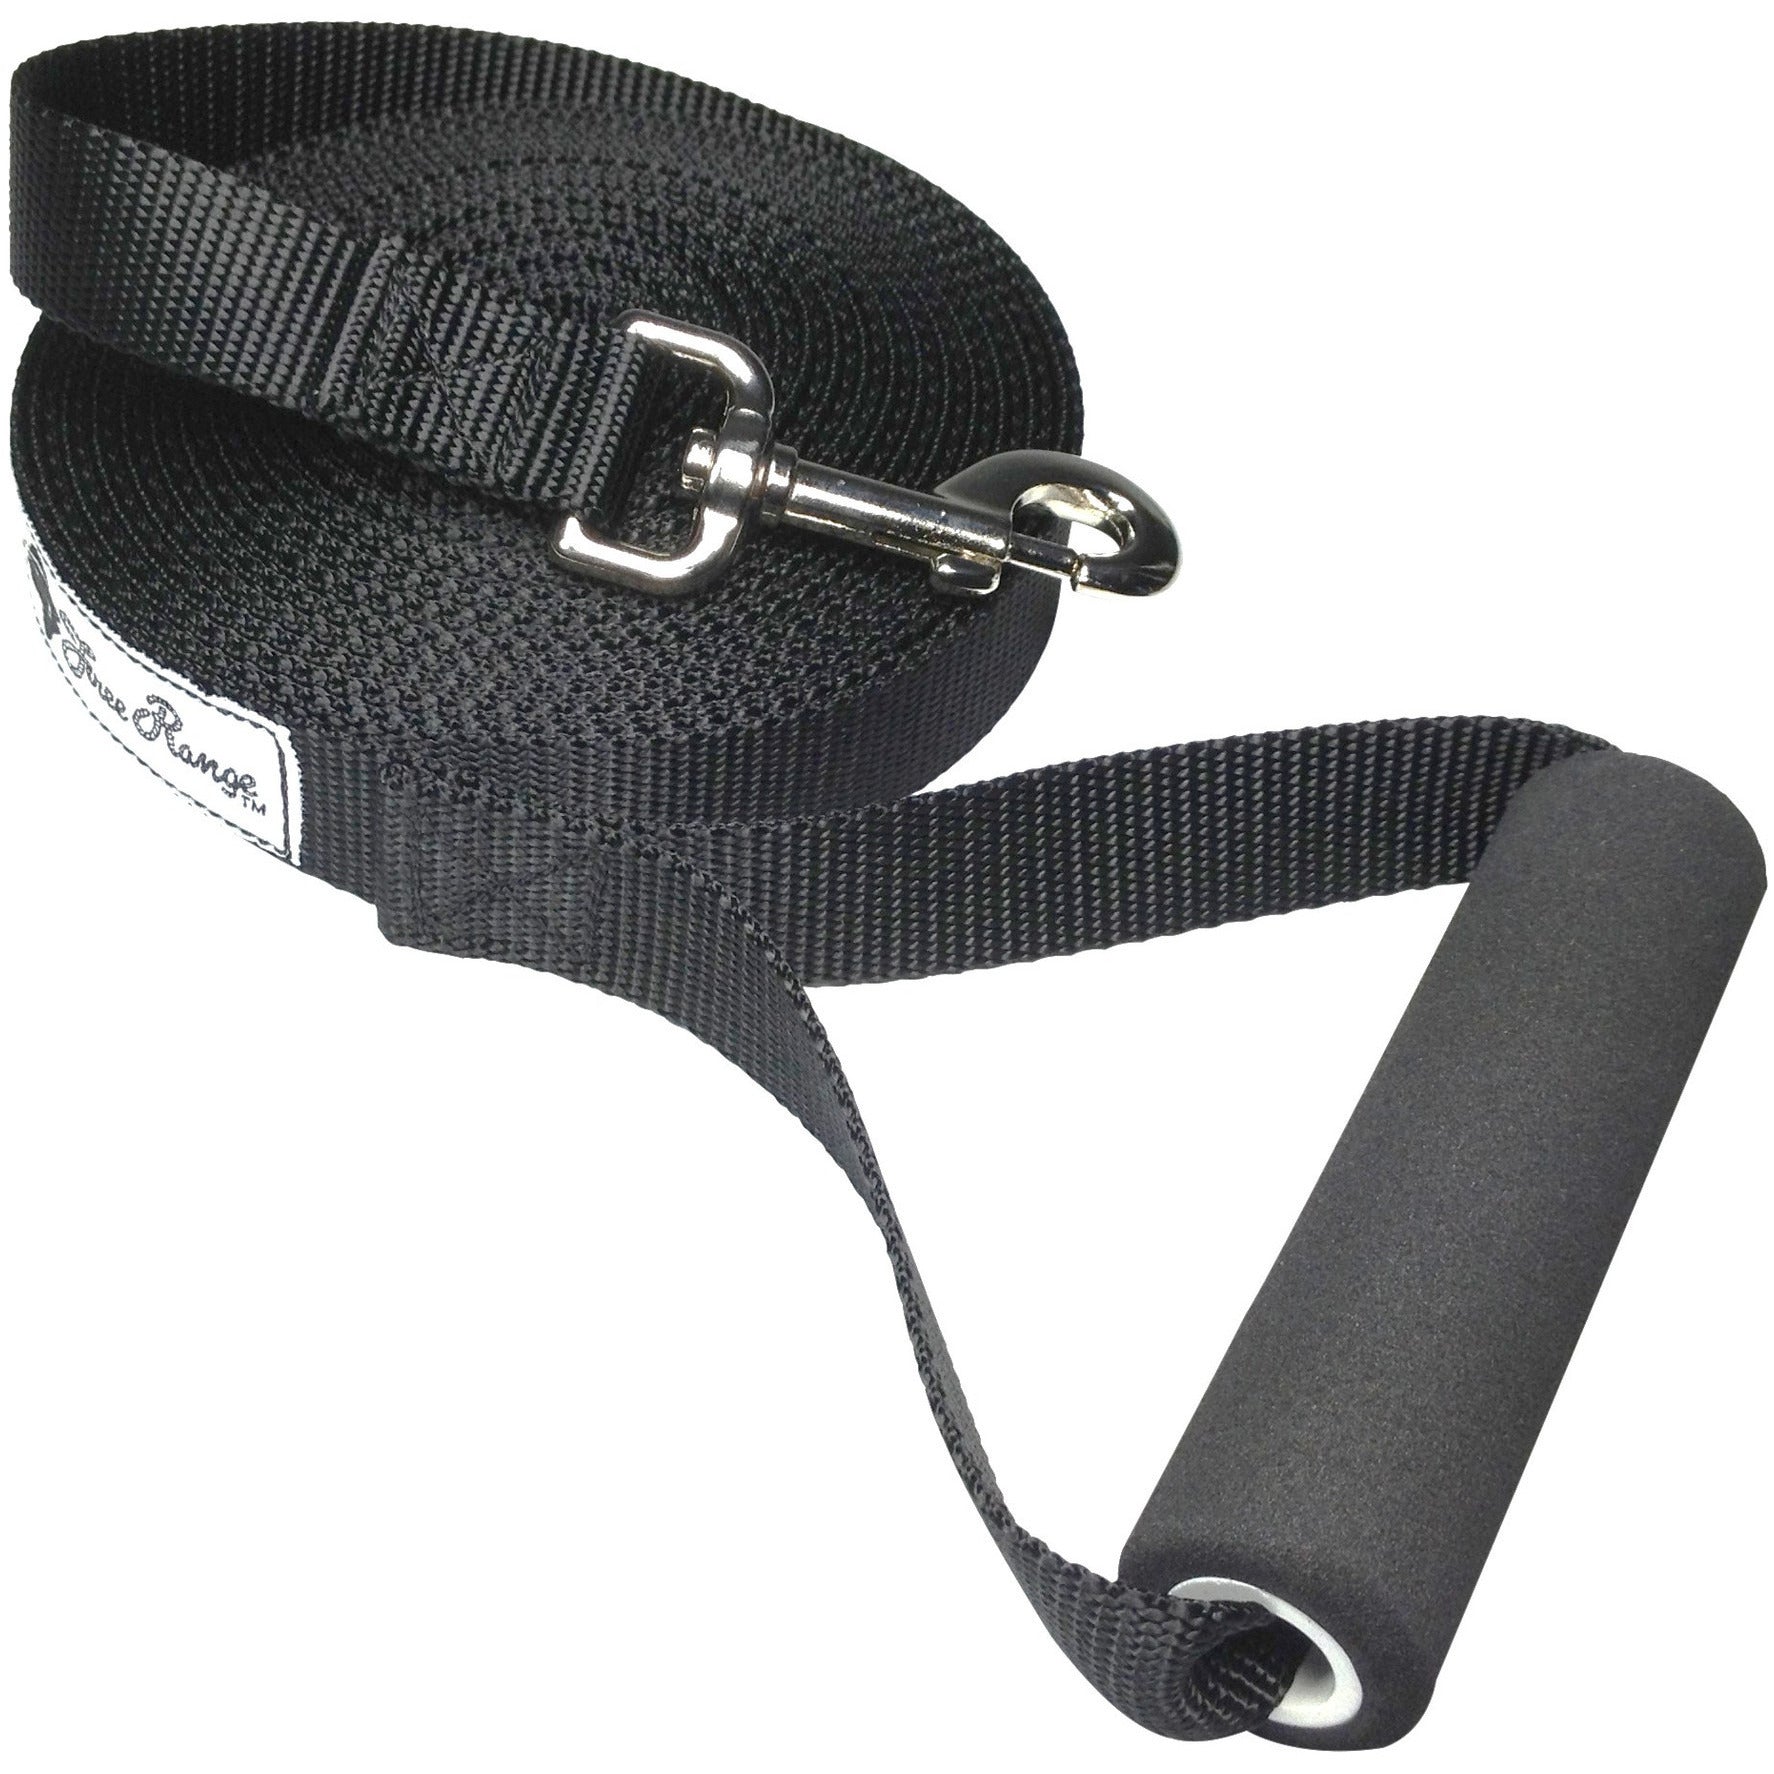 Free Range 1" - 30 Foot - Heavy Duty Training Leash for Large Dogs